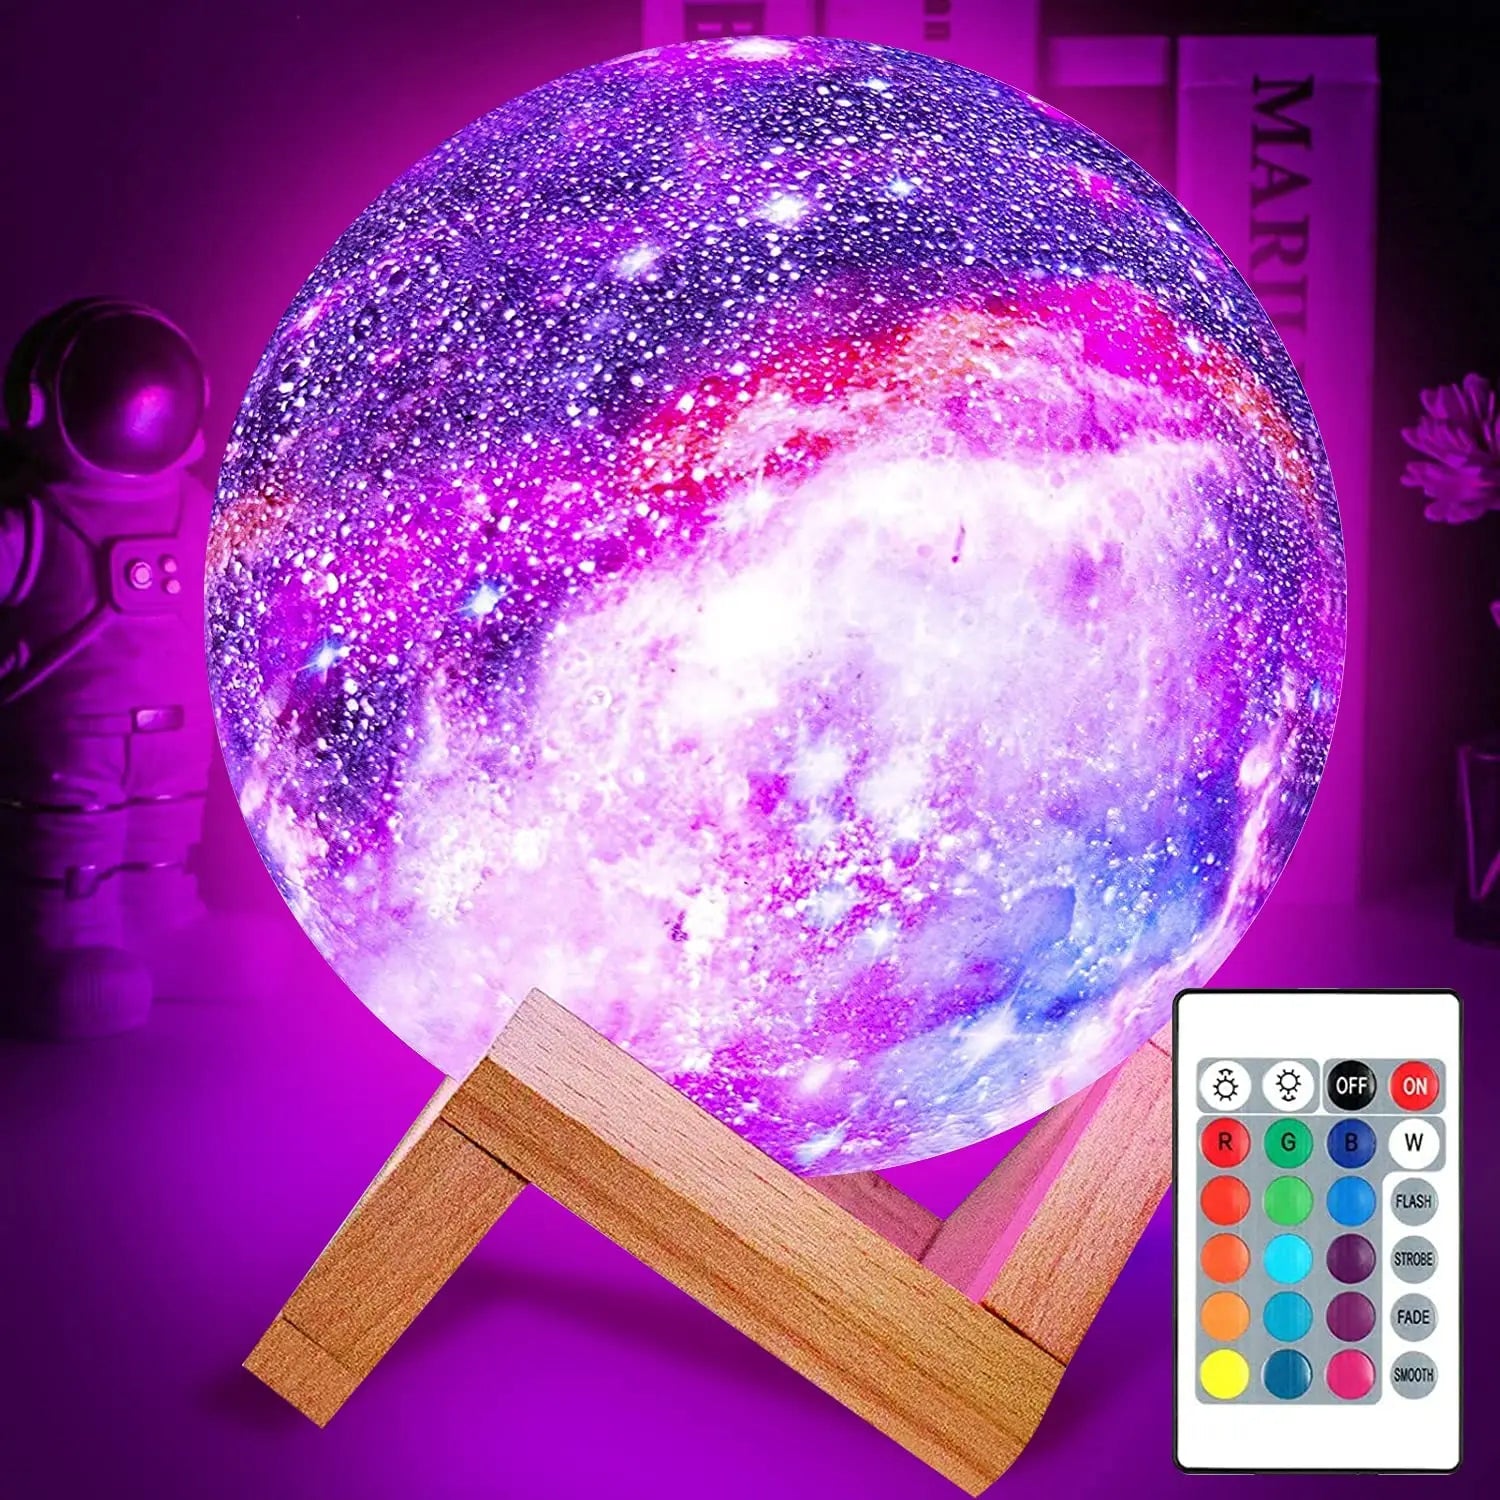 ZK30 Moon Lamp Galaxy Lamp Night Light 16 Colors LED Moon Light with Stand Remote Touch Control and USB Rechargeable Home Decor  ourlum.com 10cm 16 colors CHINA